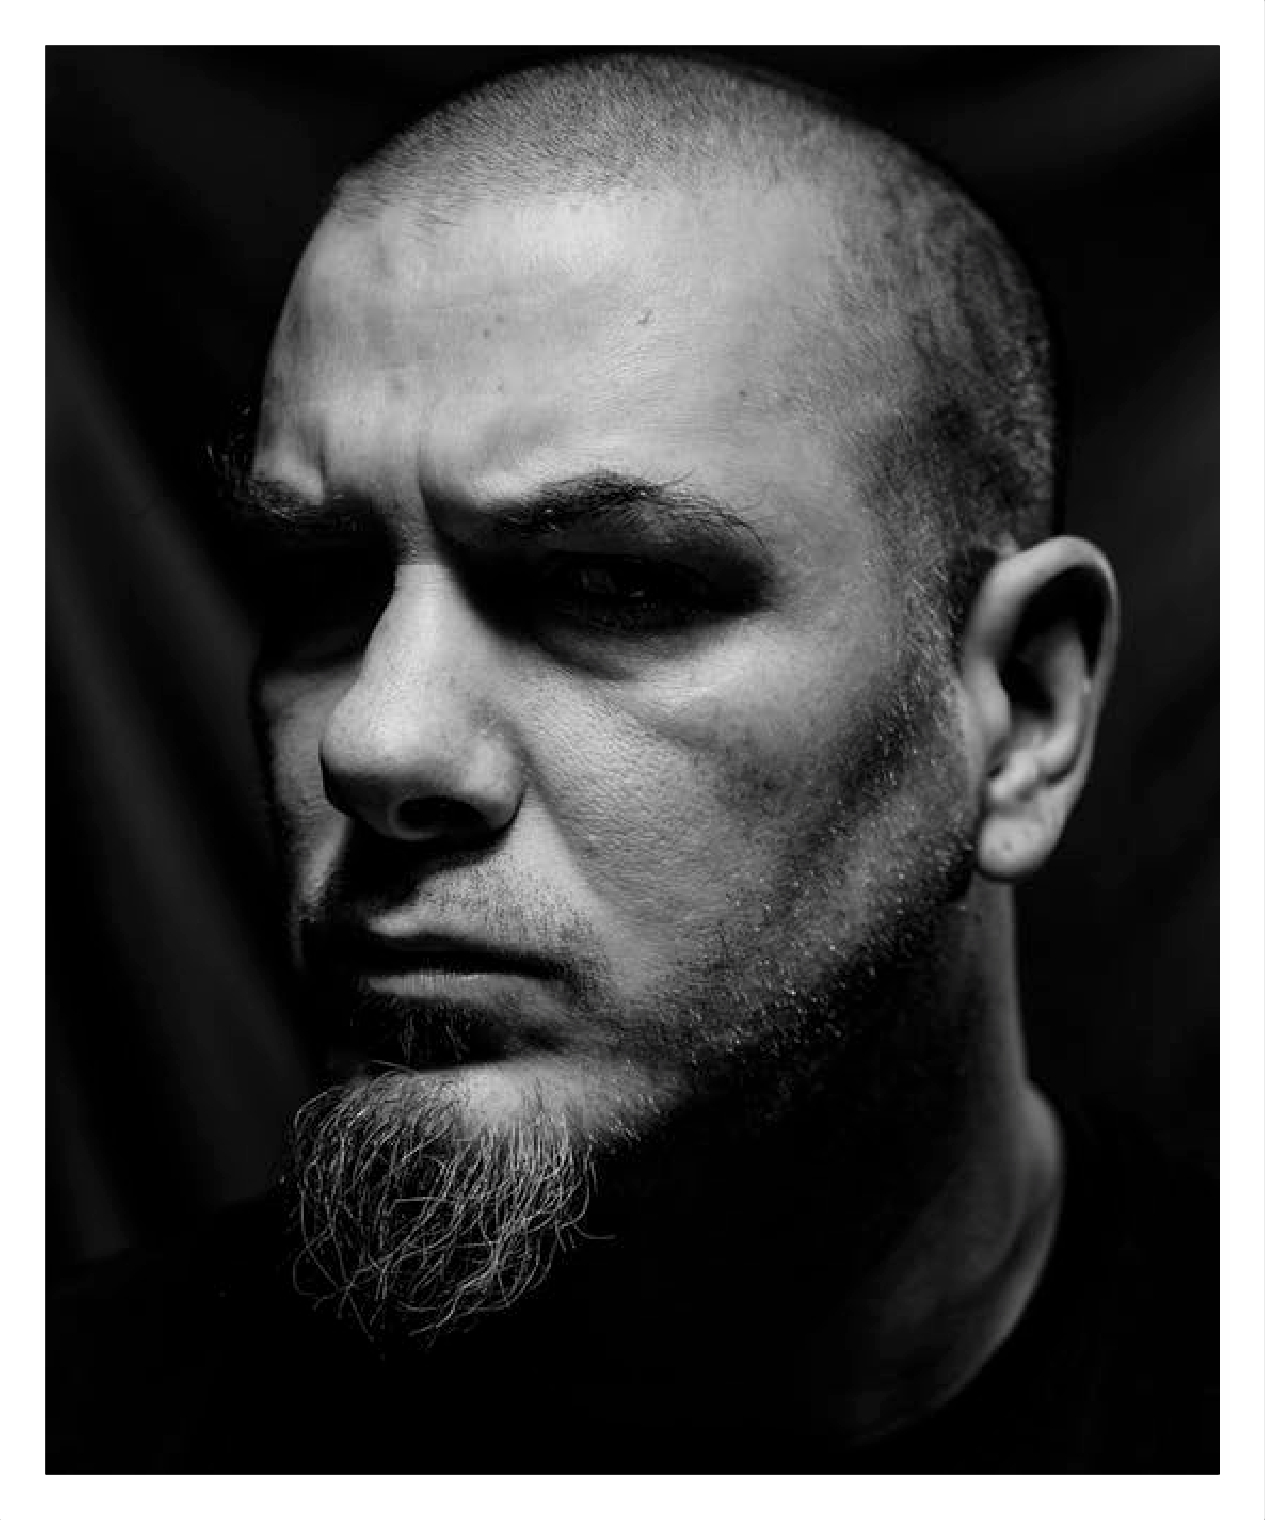 With Phil Anselmo it’s always about to get ugly – Moo Kid